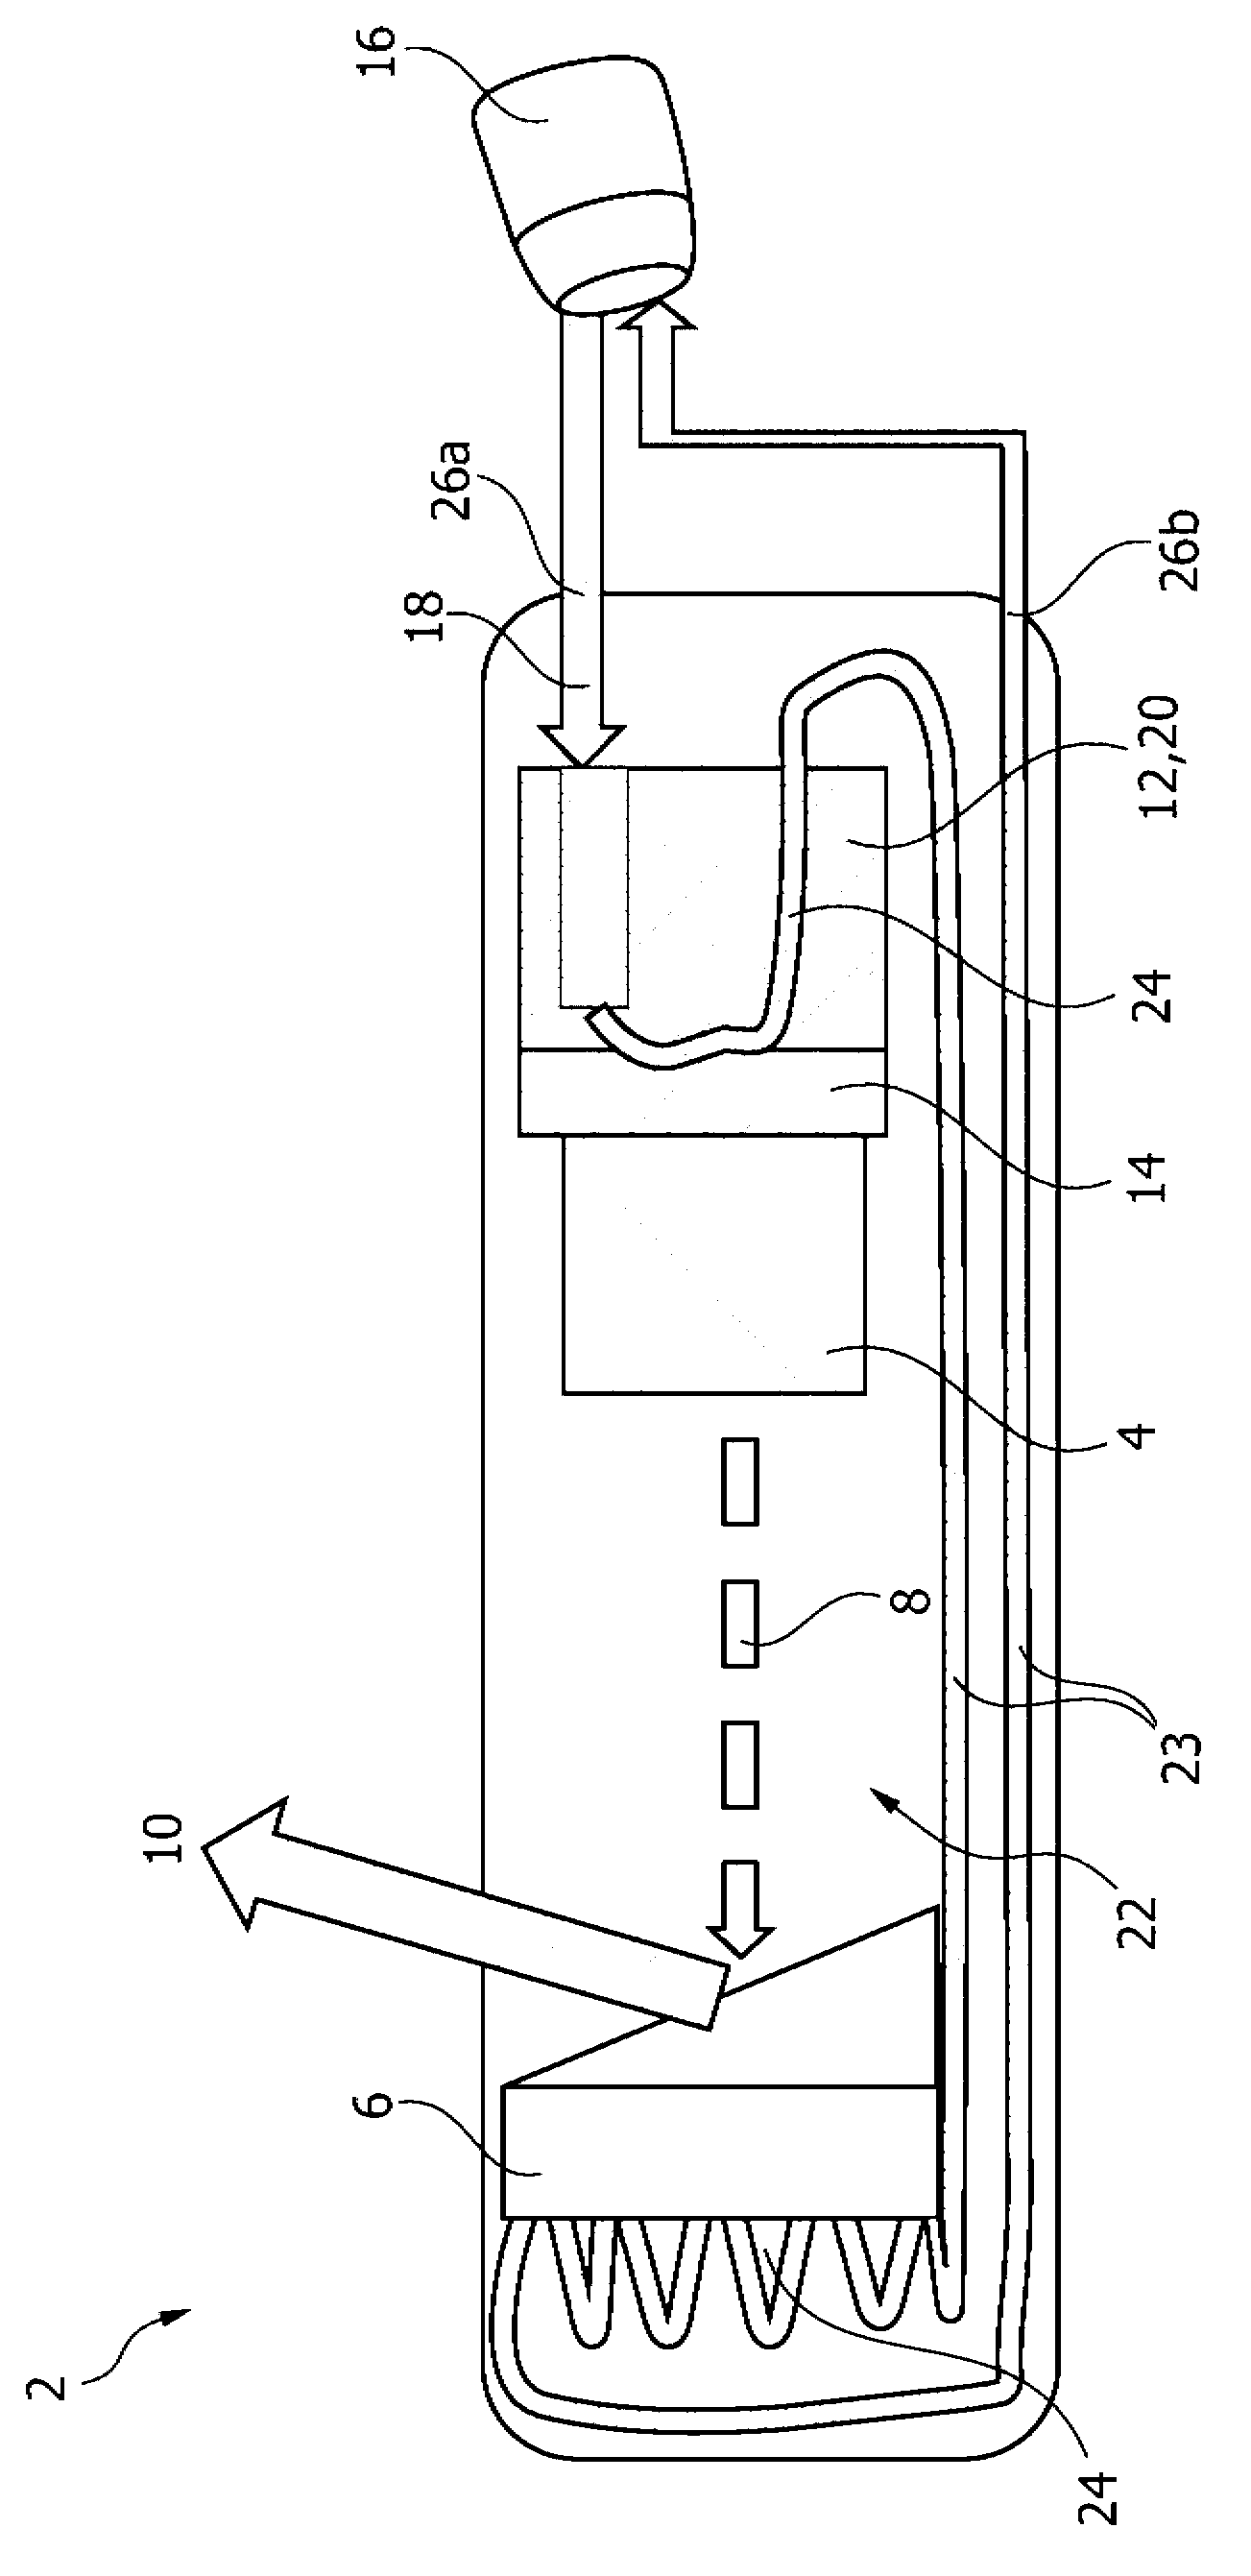 X-ray generating device employing a mechanical energy source and method